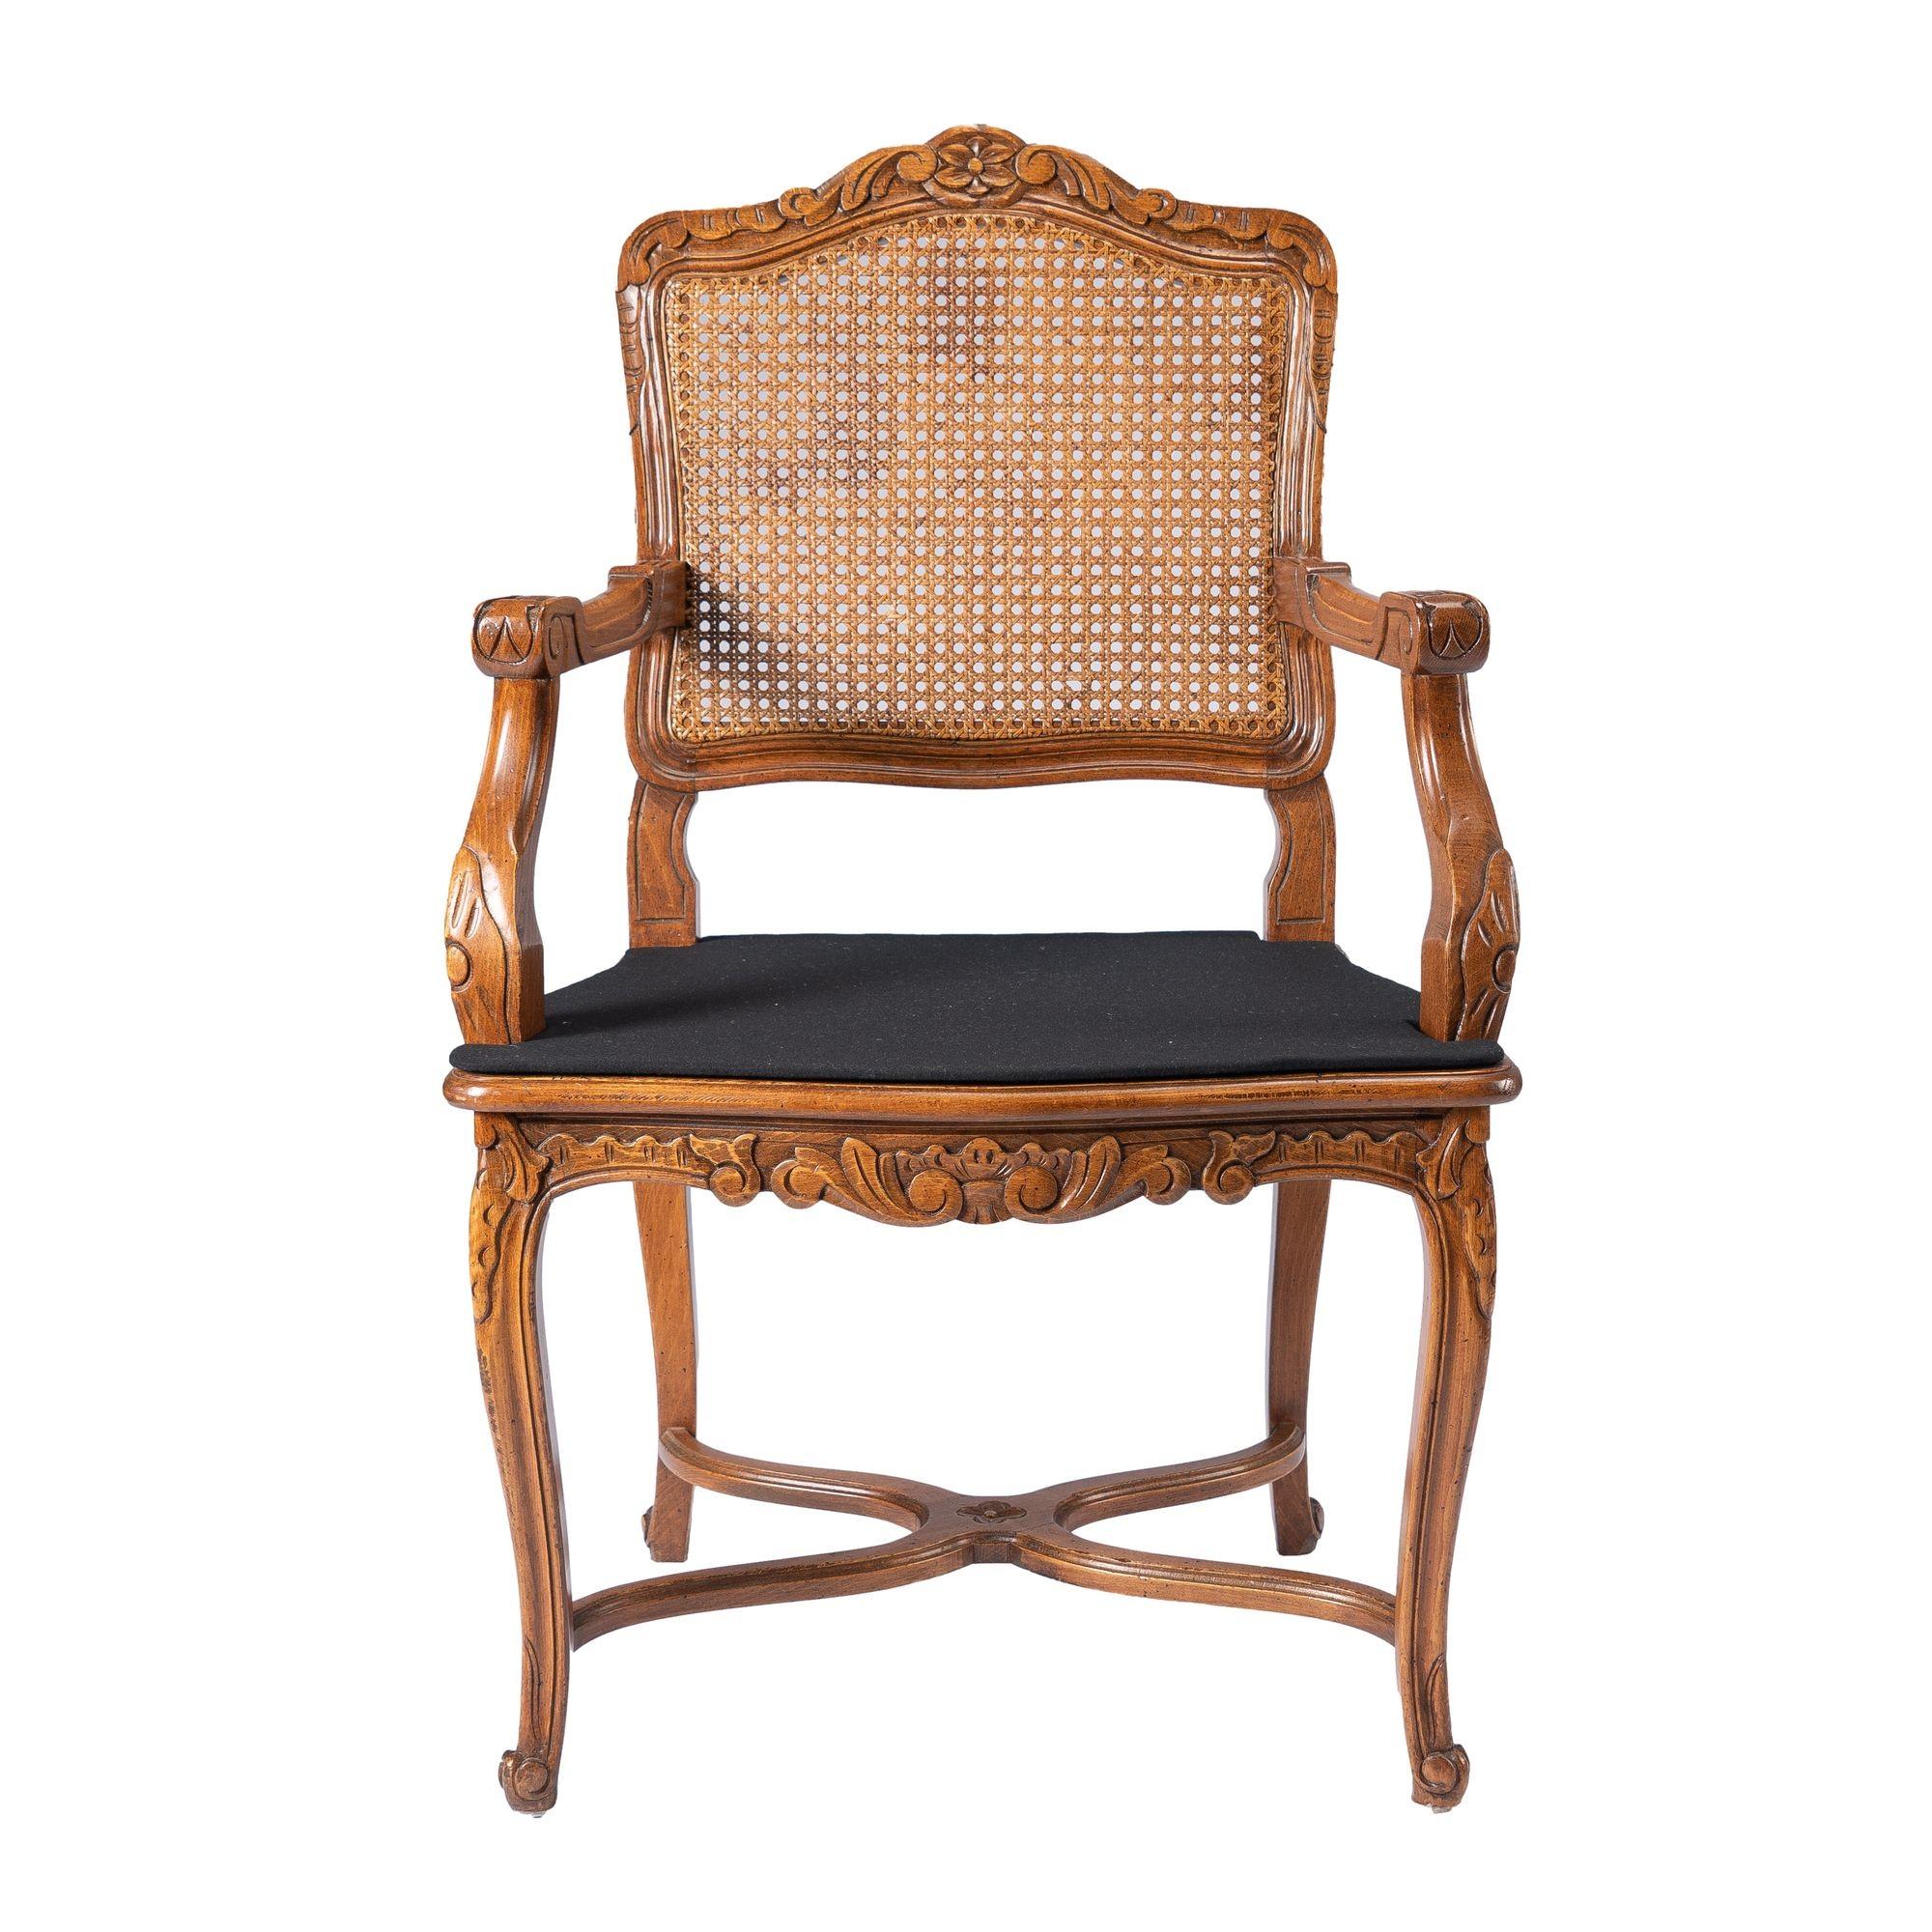 French Louis XVl style fauteuil, c. 1900's For Sale 4